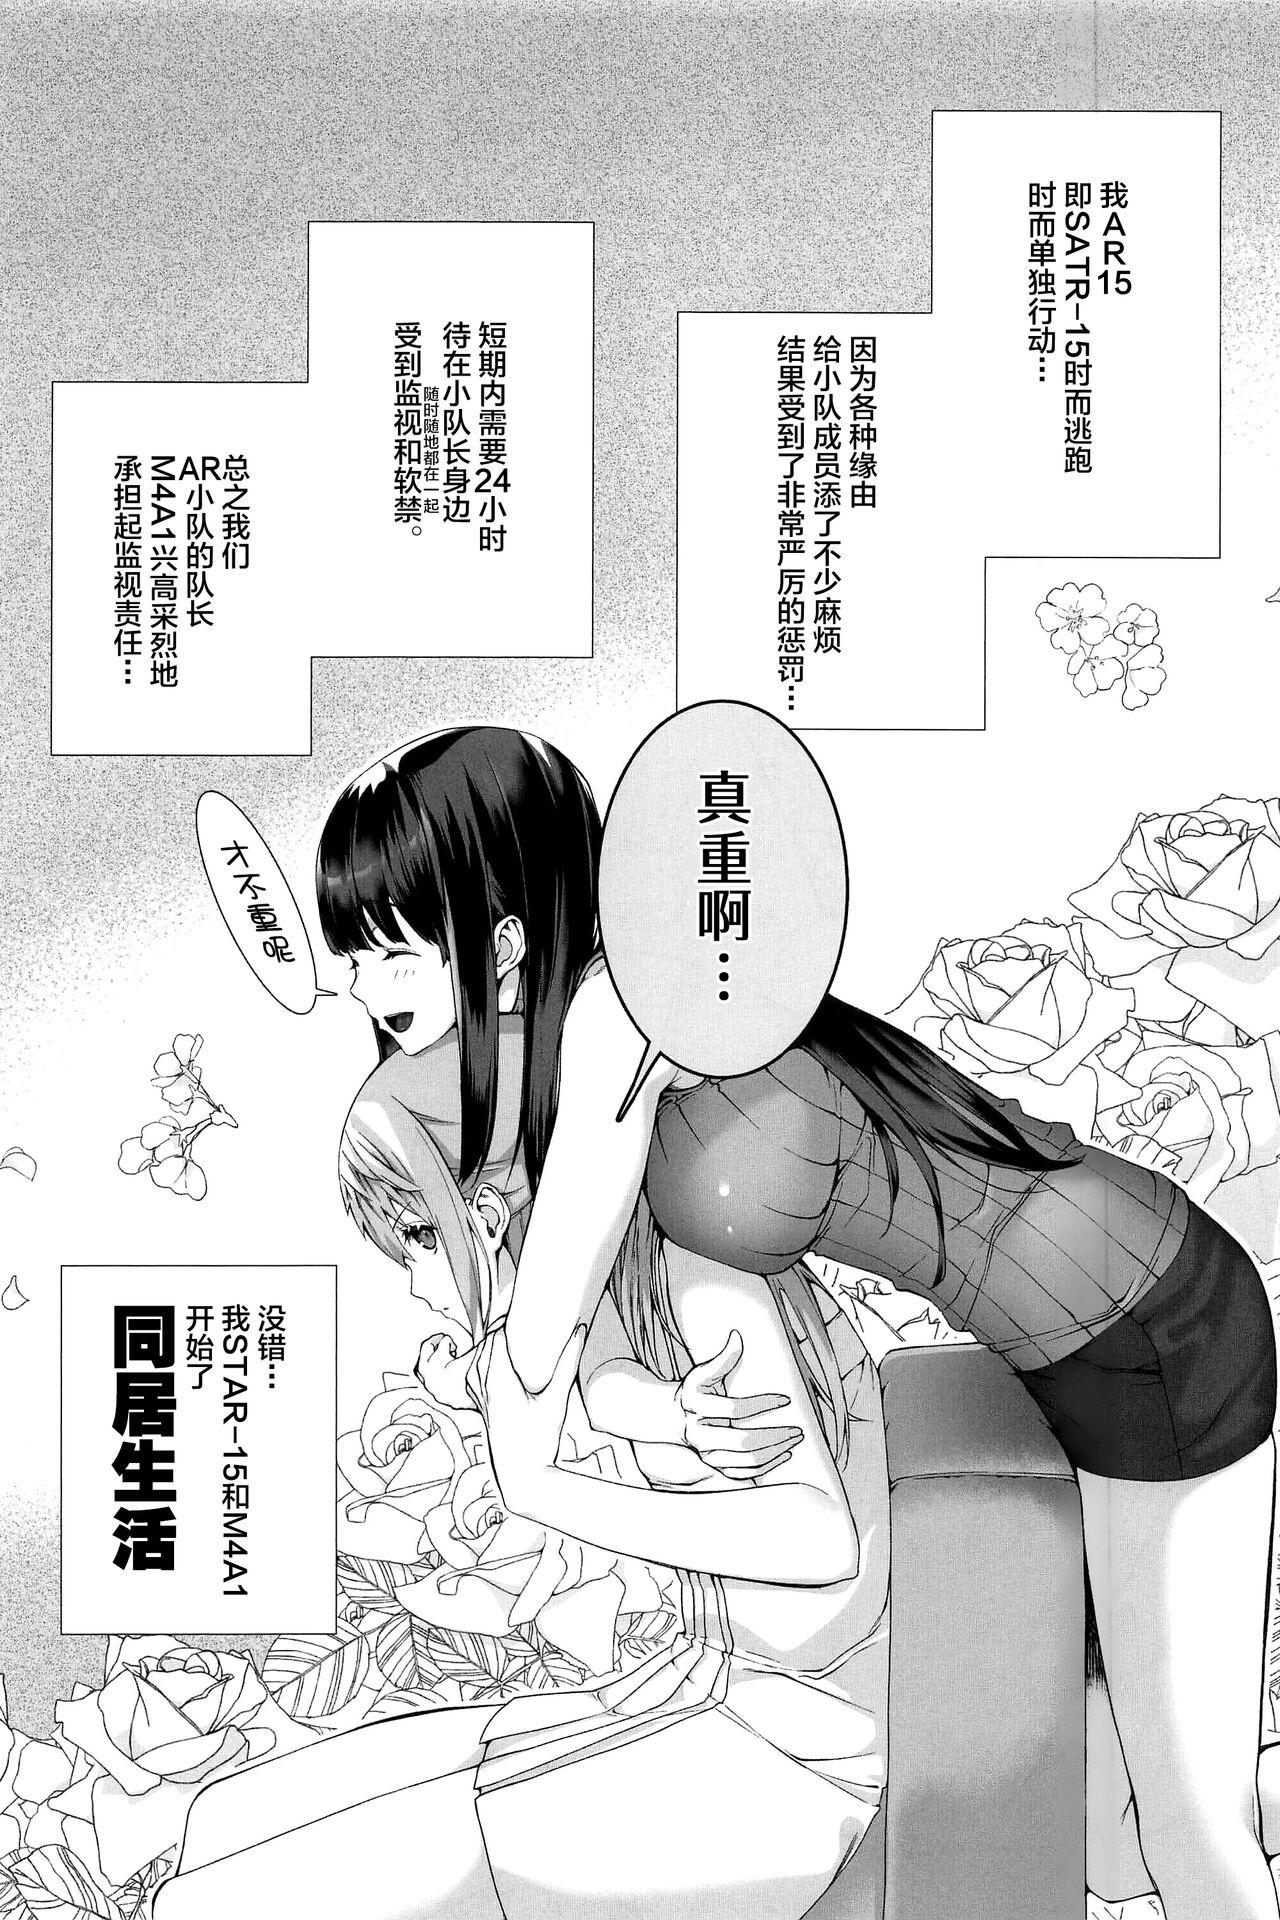 Peeing STAR15&M4A1 - Girls frontline Free Rough Sex - Page 3